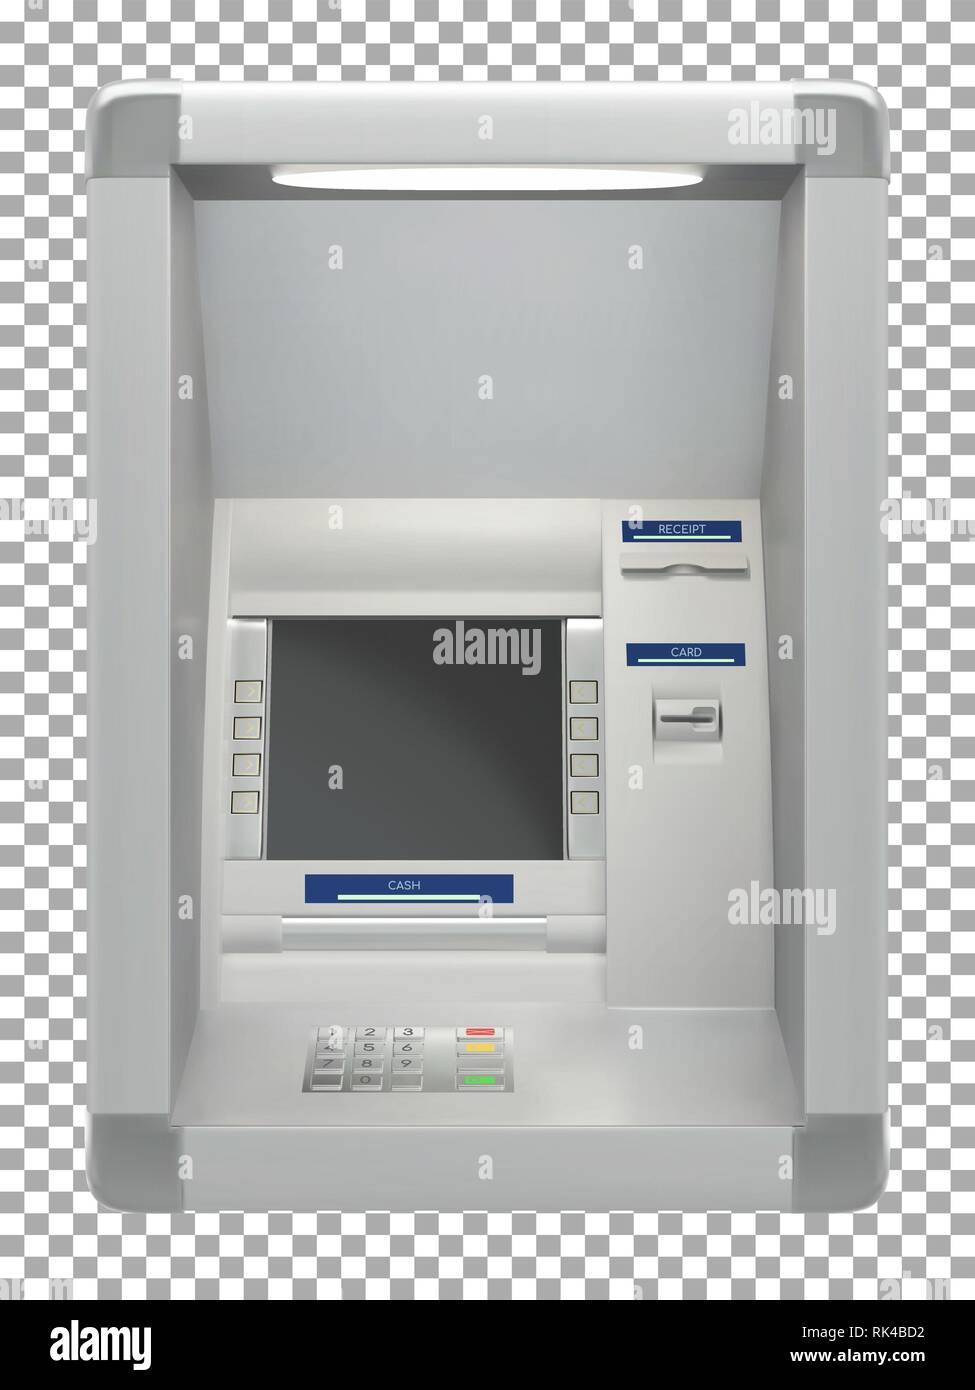 Atm bank machine with a card reader and display screen. Vector illustration Stock Vector